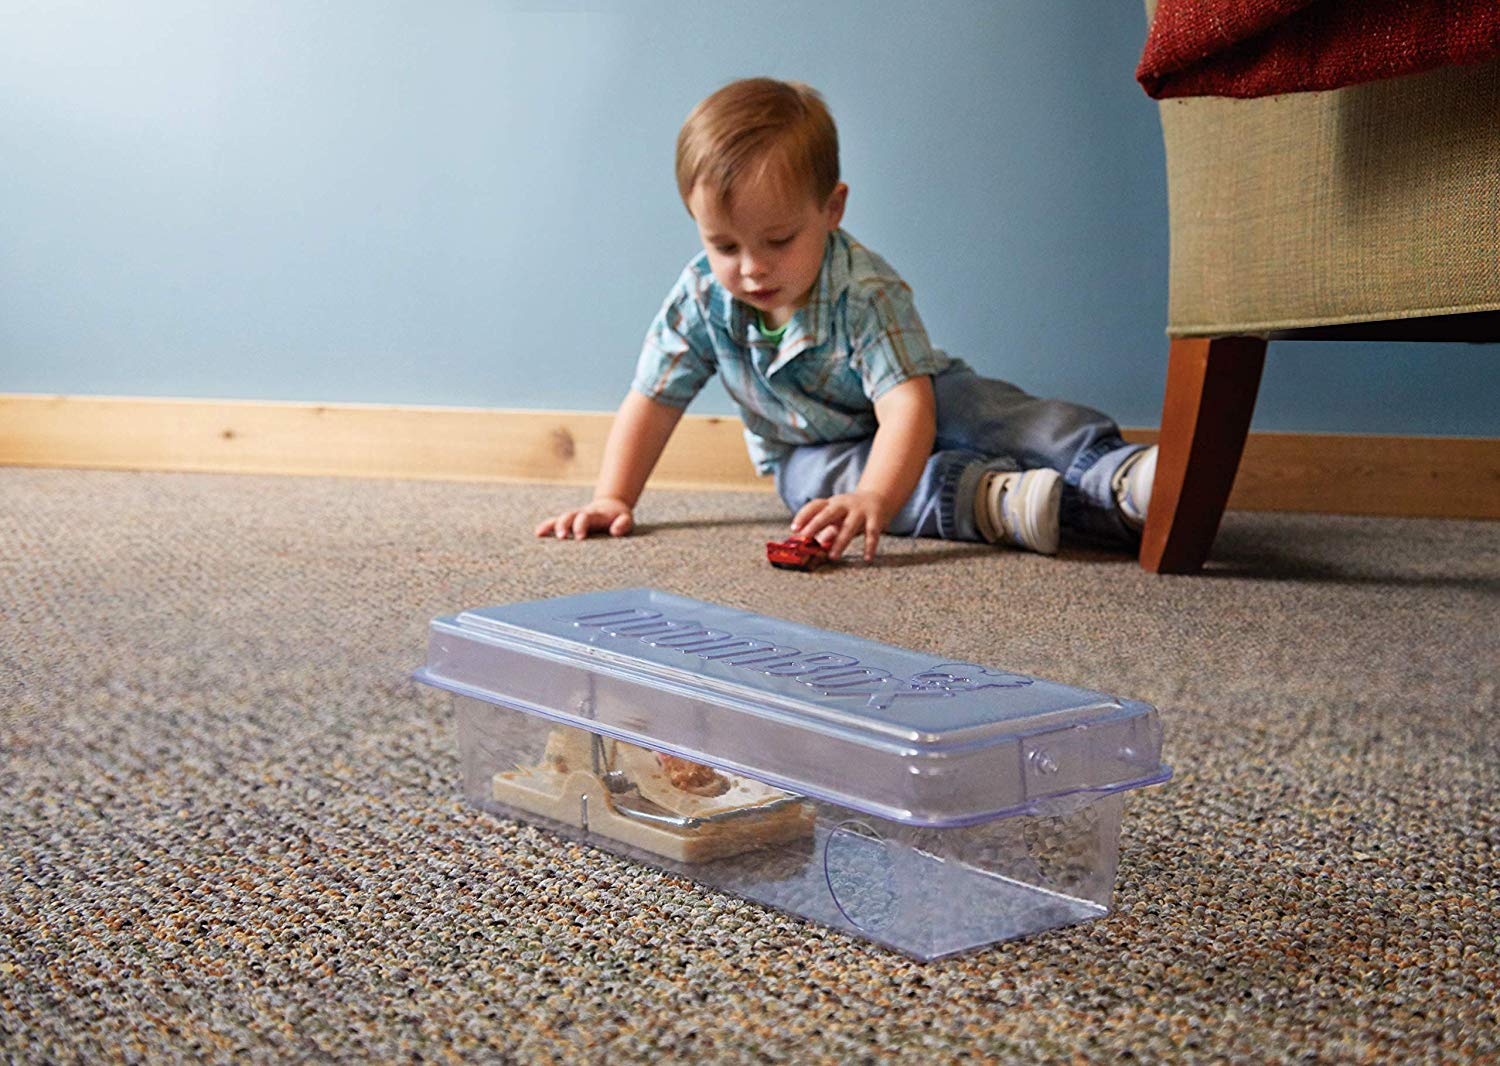 DoomBox Enclosed Mouse - Keeps the Trap (&mice( from Pets & Kids at Pl –  Batteries 4 Stores